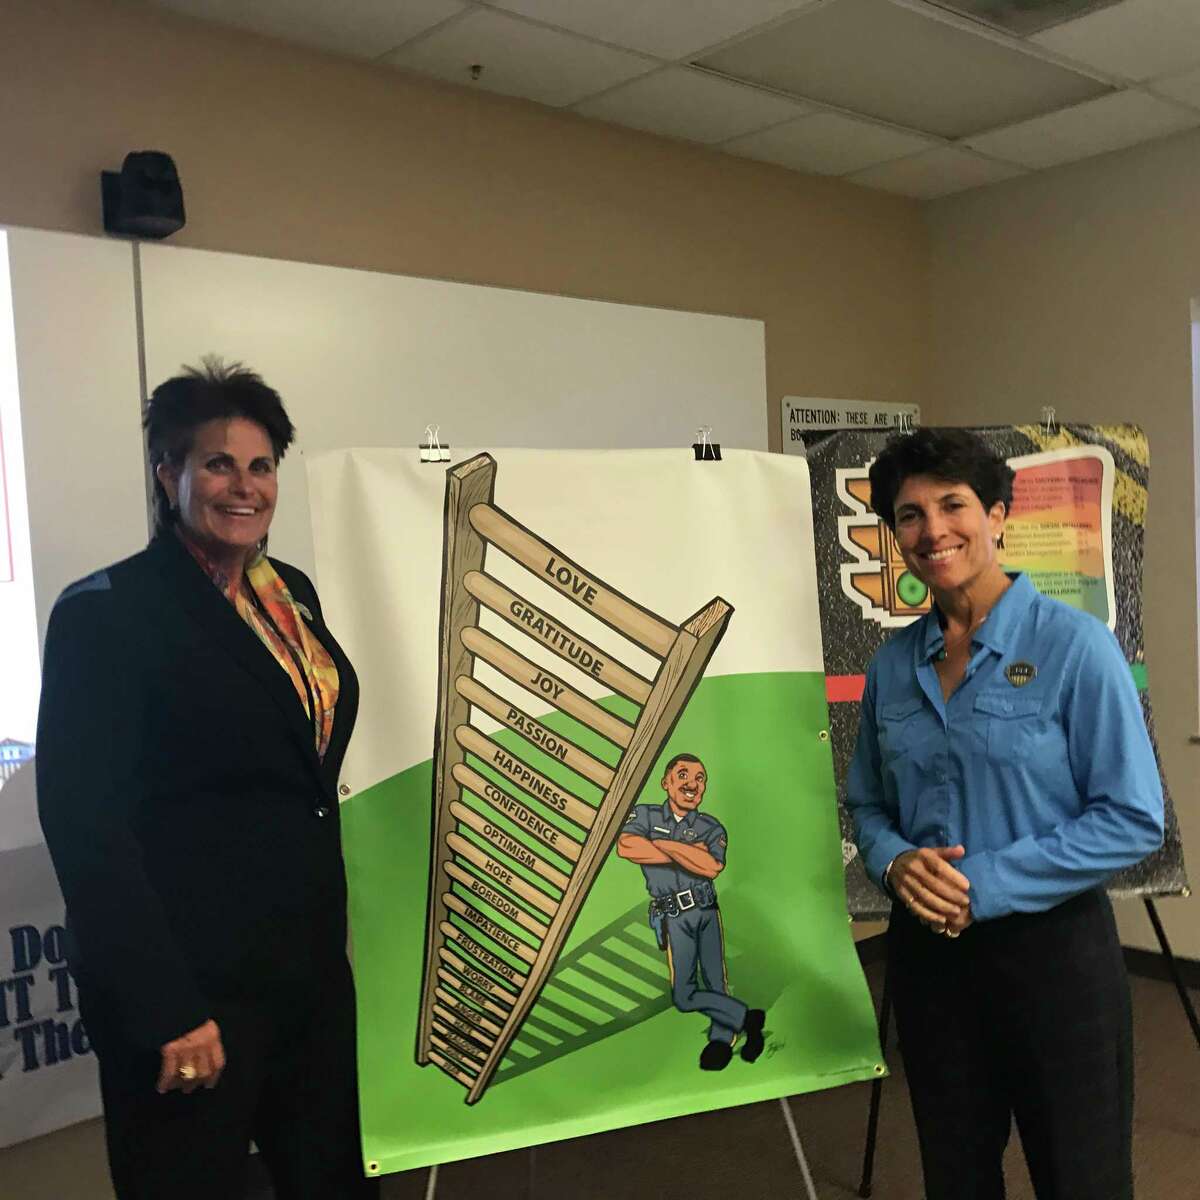 Linda Webb and Randy Friedman, co-founders of Racial Intelligence Training and Engagement Academy, pose by a curriculum poster featuring the 18-tier emotions ladder at a training in Missouri City June 7, 2017.